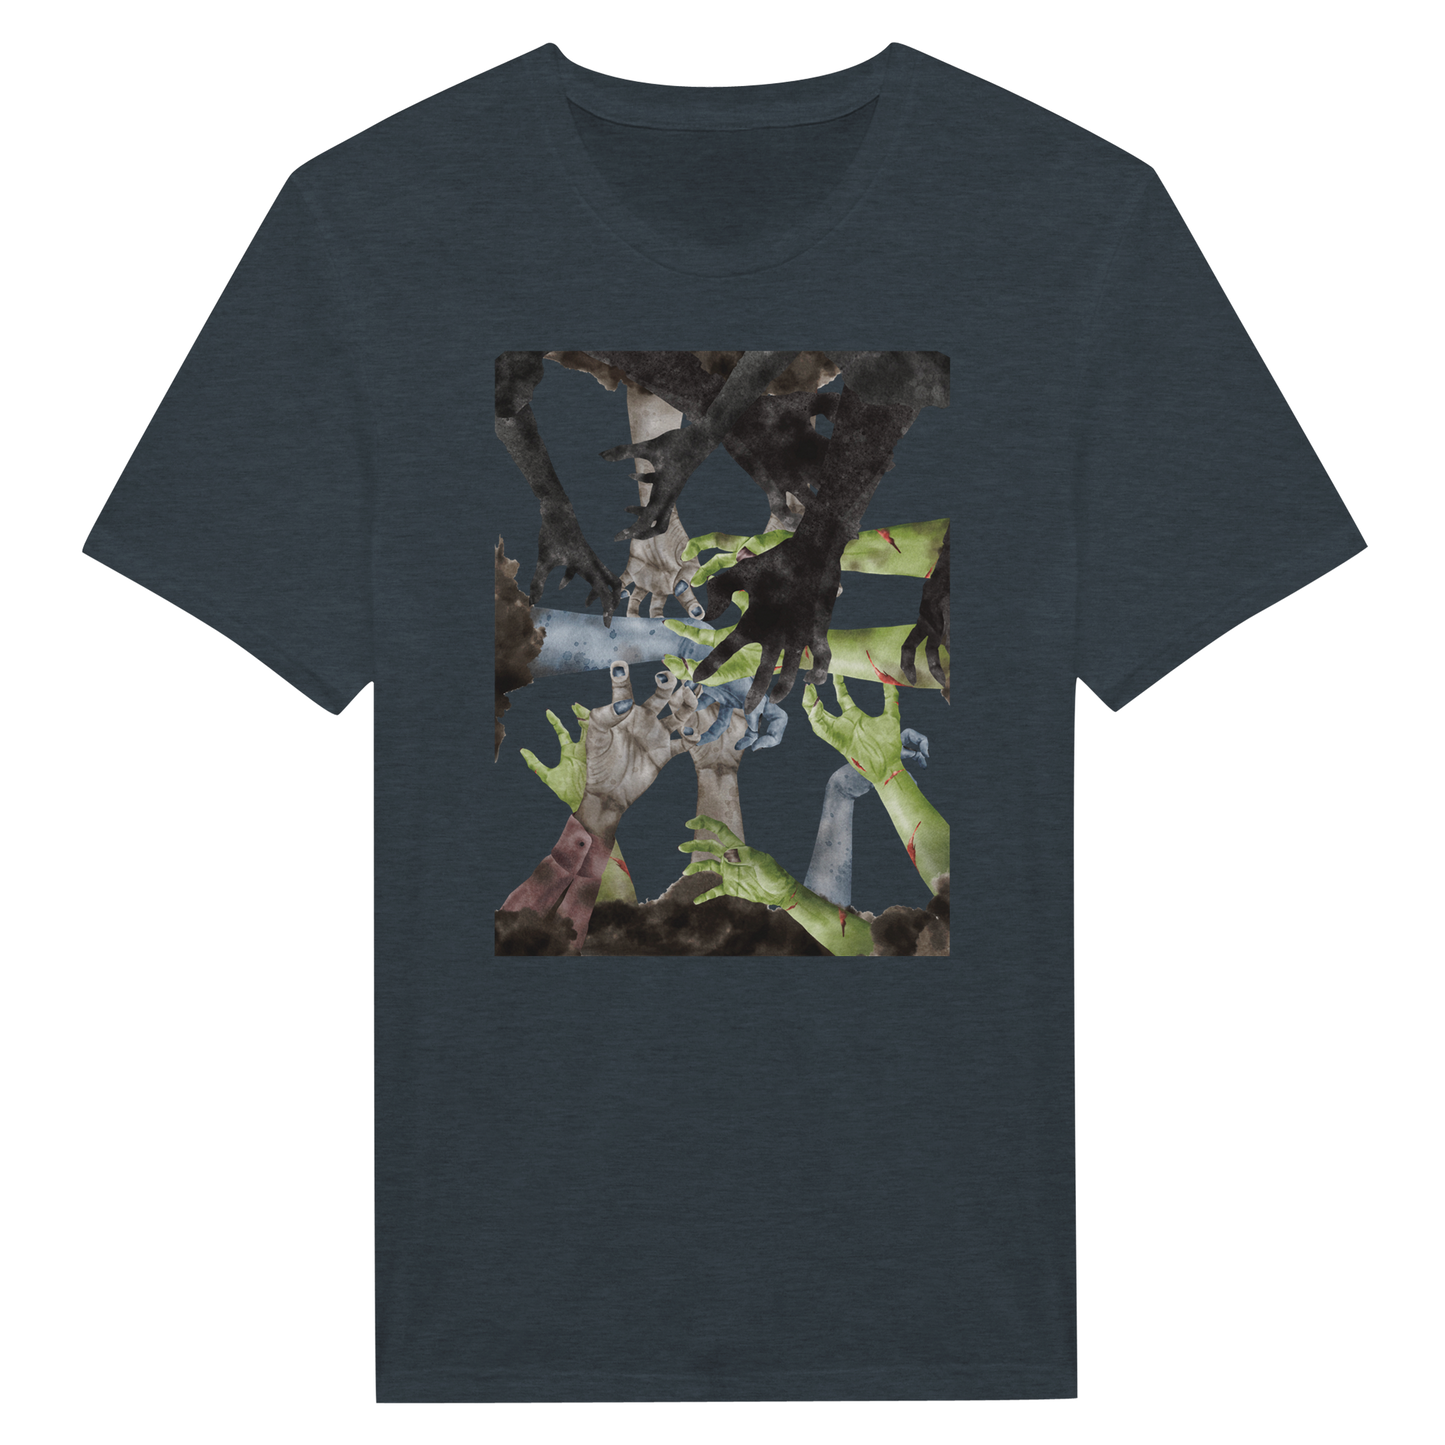 Black Tee Shirt with zombie hands reaching in the center.